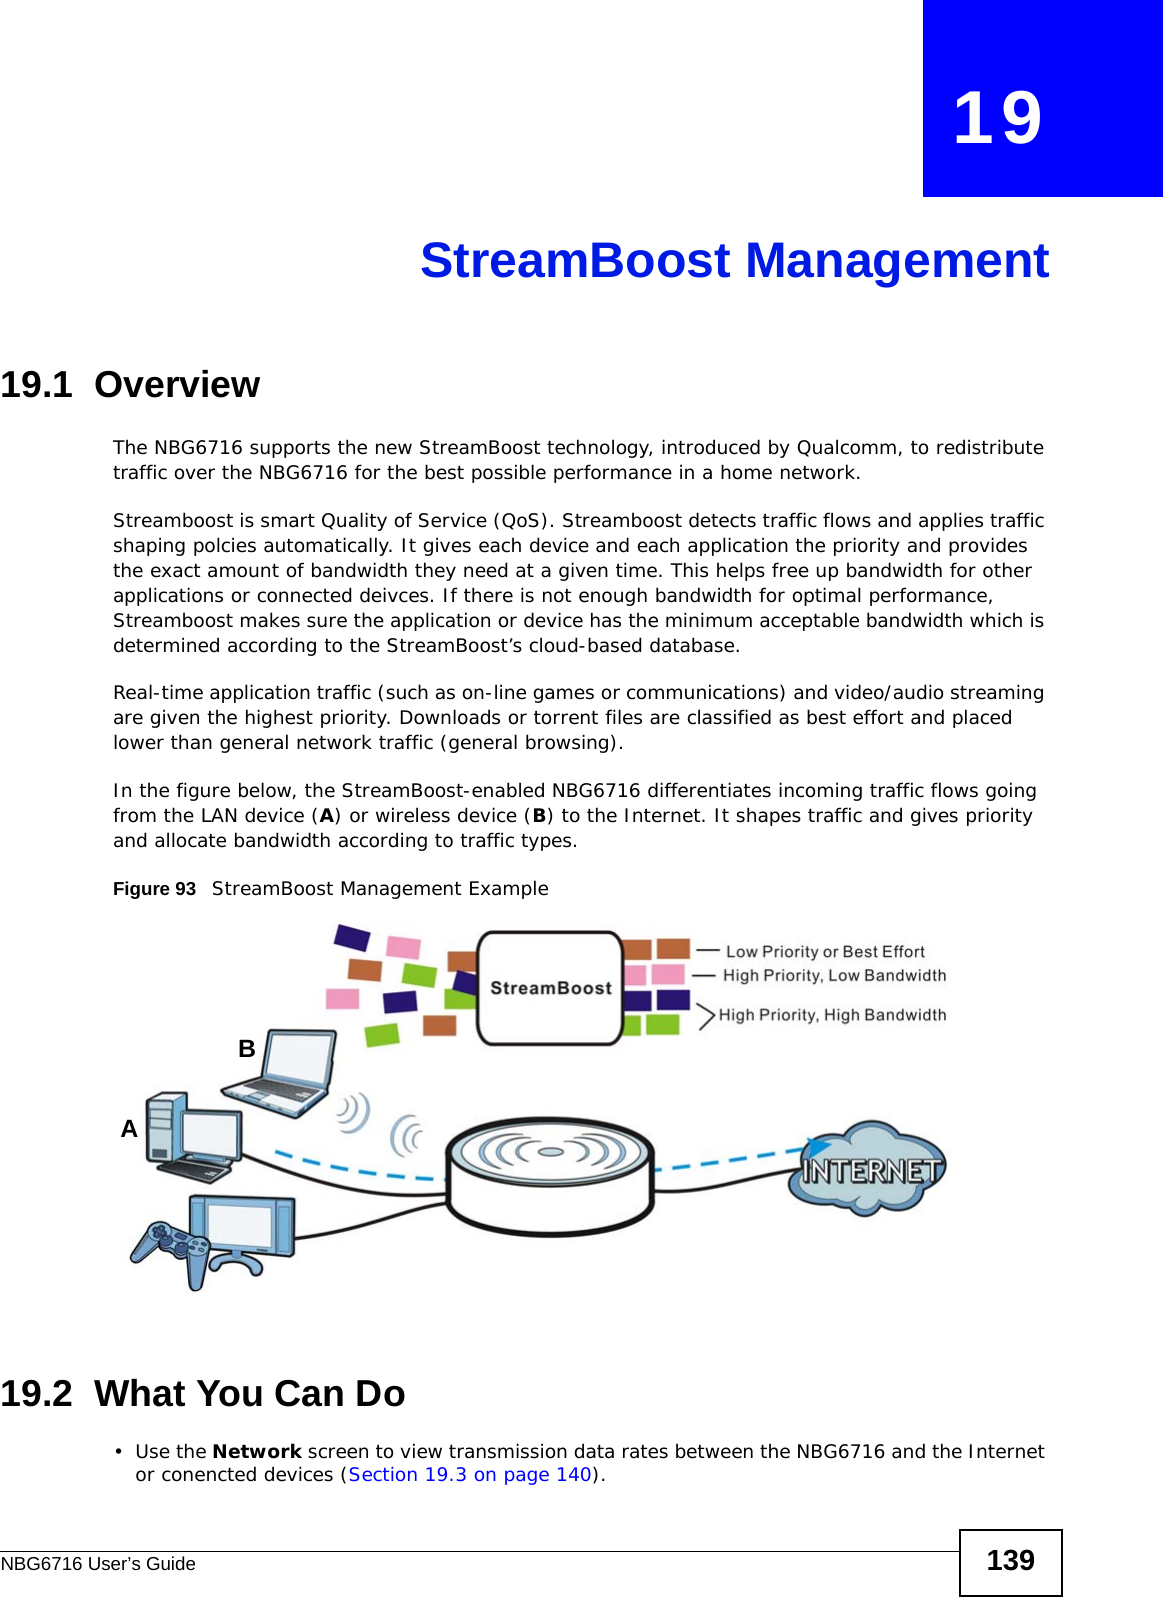 NBG6716 User’s Guide 139CHAPTER   19StreamBoost Management19.1  Overview The NBG6716 supports the new StreamBoost technology, introduced by Qualcomm, to redistribute traffic over the NBG6716 for the best possible performance in a home network. Streamboost is smart Quality of Service (QoS). Streamboost detects traffic flows and applies traffic shaping polcies automatically. It gives each device and each application the priority and provides the exact amount of bandwidth they need at a given time. This helps free up bandwidth for other applications or connected deivces. If there is not enough bandwidth for optimal performance, Streamboost makes sure the application or device has the minimum acceptable bandwidth which is determined according to the StreamBoost’s cloud-based database. Real-time application traffic (such as on-line games or communications) and video/audio streaming are given the highest priority. Downloads or torrent files are classified as best effort and placed lower than general network traffic (general browsing).In the figure below, the StreamBoost-enabled NBG6716 differentiates incoming traffic flows going from the LAN device (A) or wireless device (B) to the Internet. It shapes traffic and gives priority and allocate bandwidth according to traffic types.Figure 93   StreamBoost Management Example19.2  What You Can Do•Use the Network screen to view transmission data rates between the NBG6716 and the Internet or conencted devices (Section 19.3 on page 140).AB